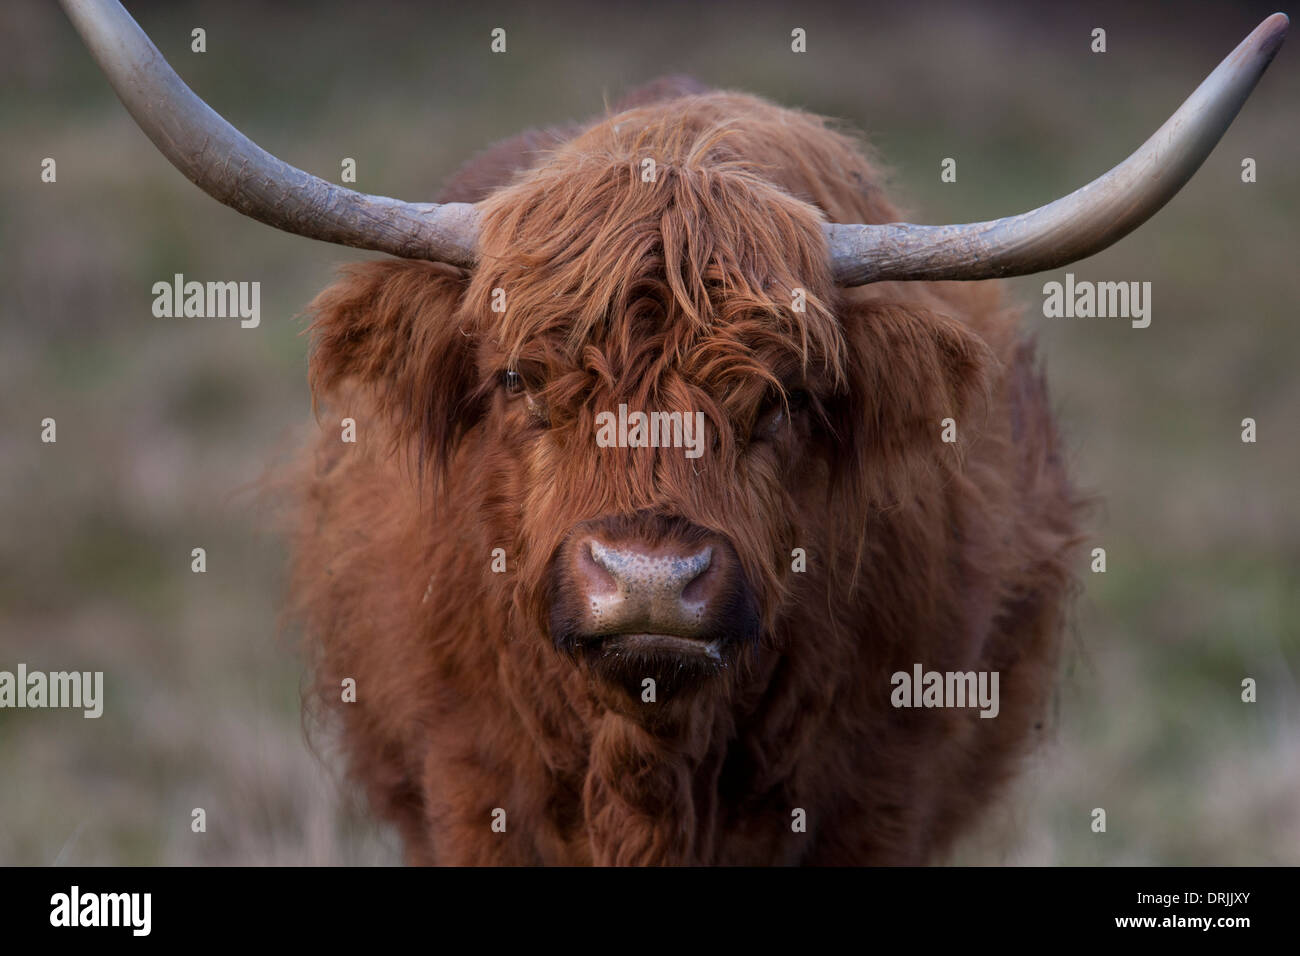 Long-haired cattle with huge horns Stock Photo